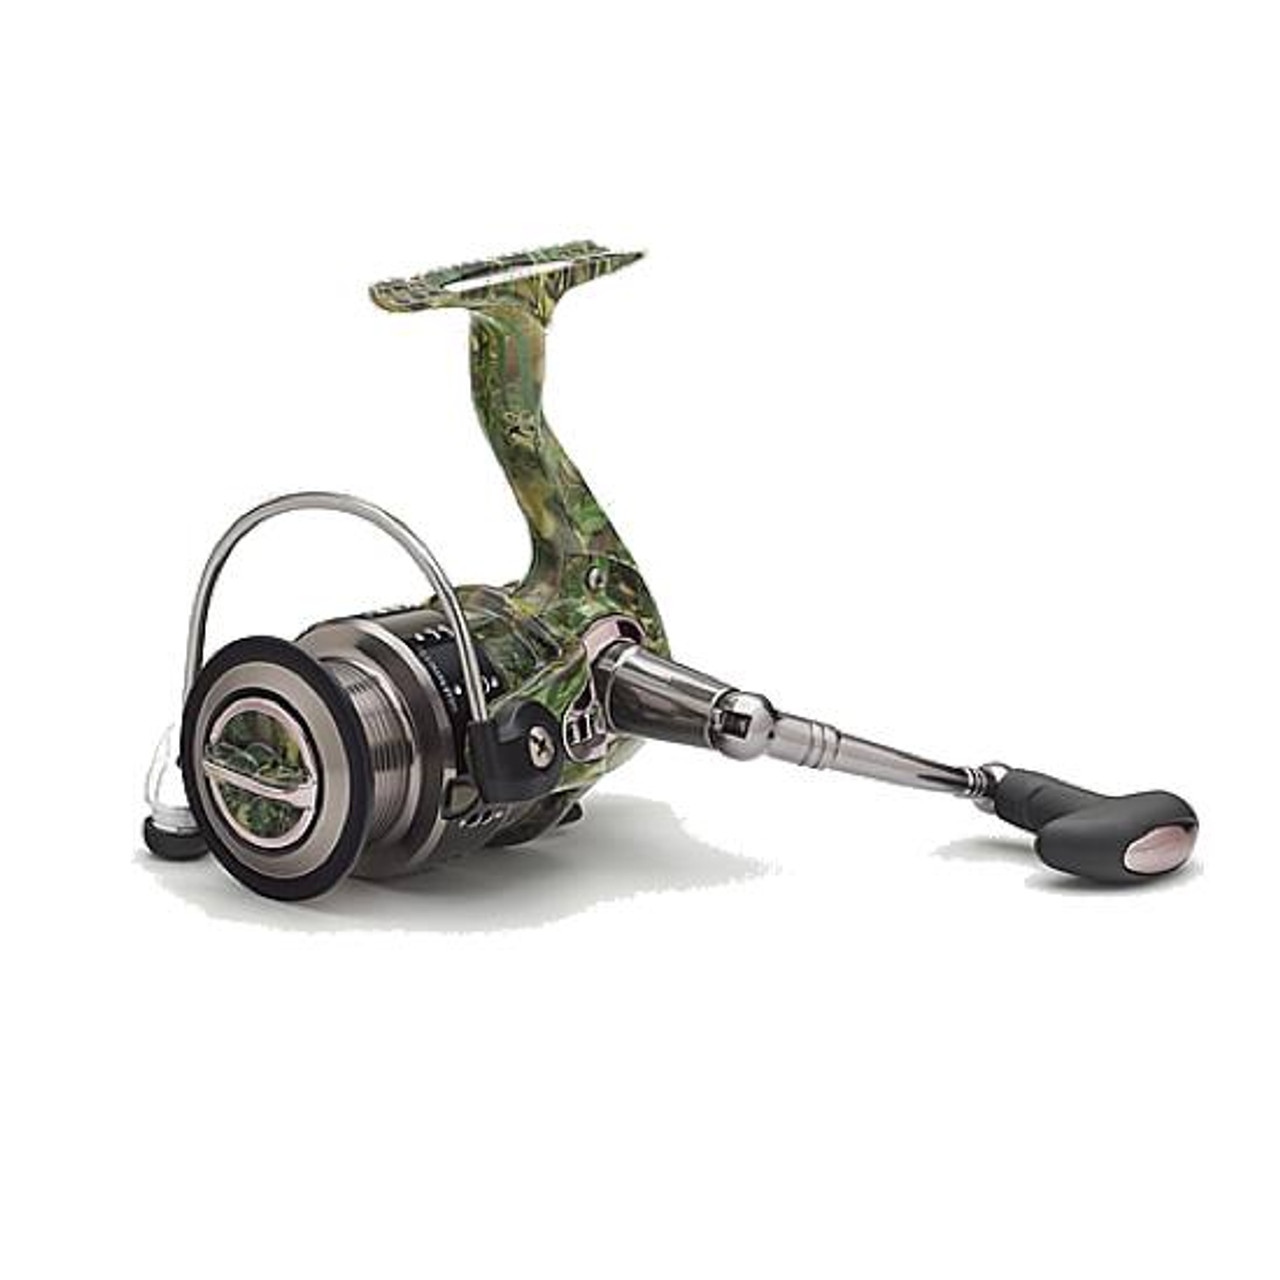 Ardent Edgewater Fishouflage Spinning Reel - Size 1000 [FC-00817227010046]  - Cheaper Than Dirt